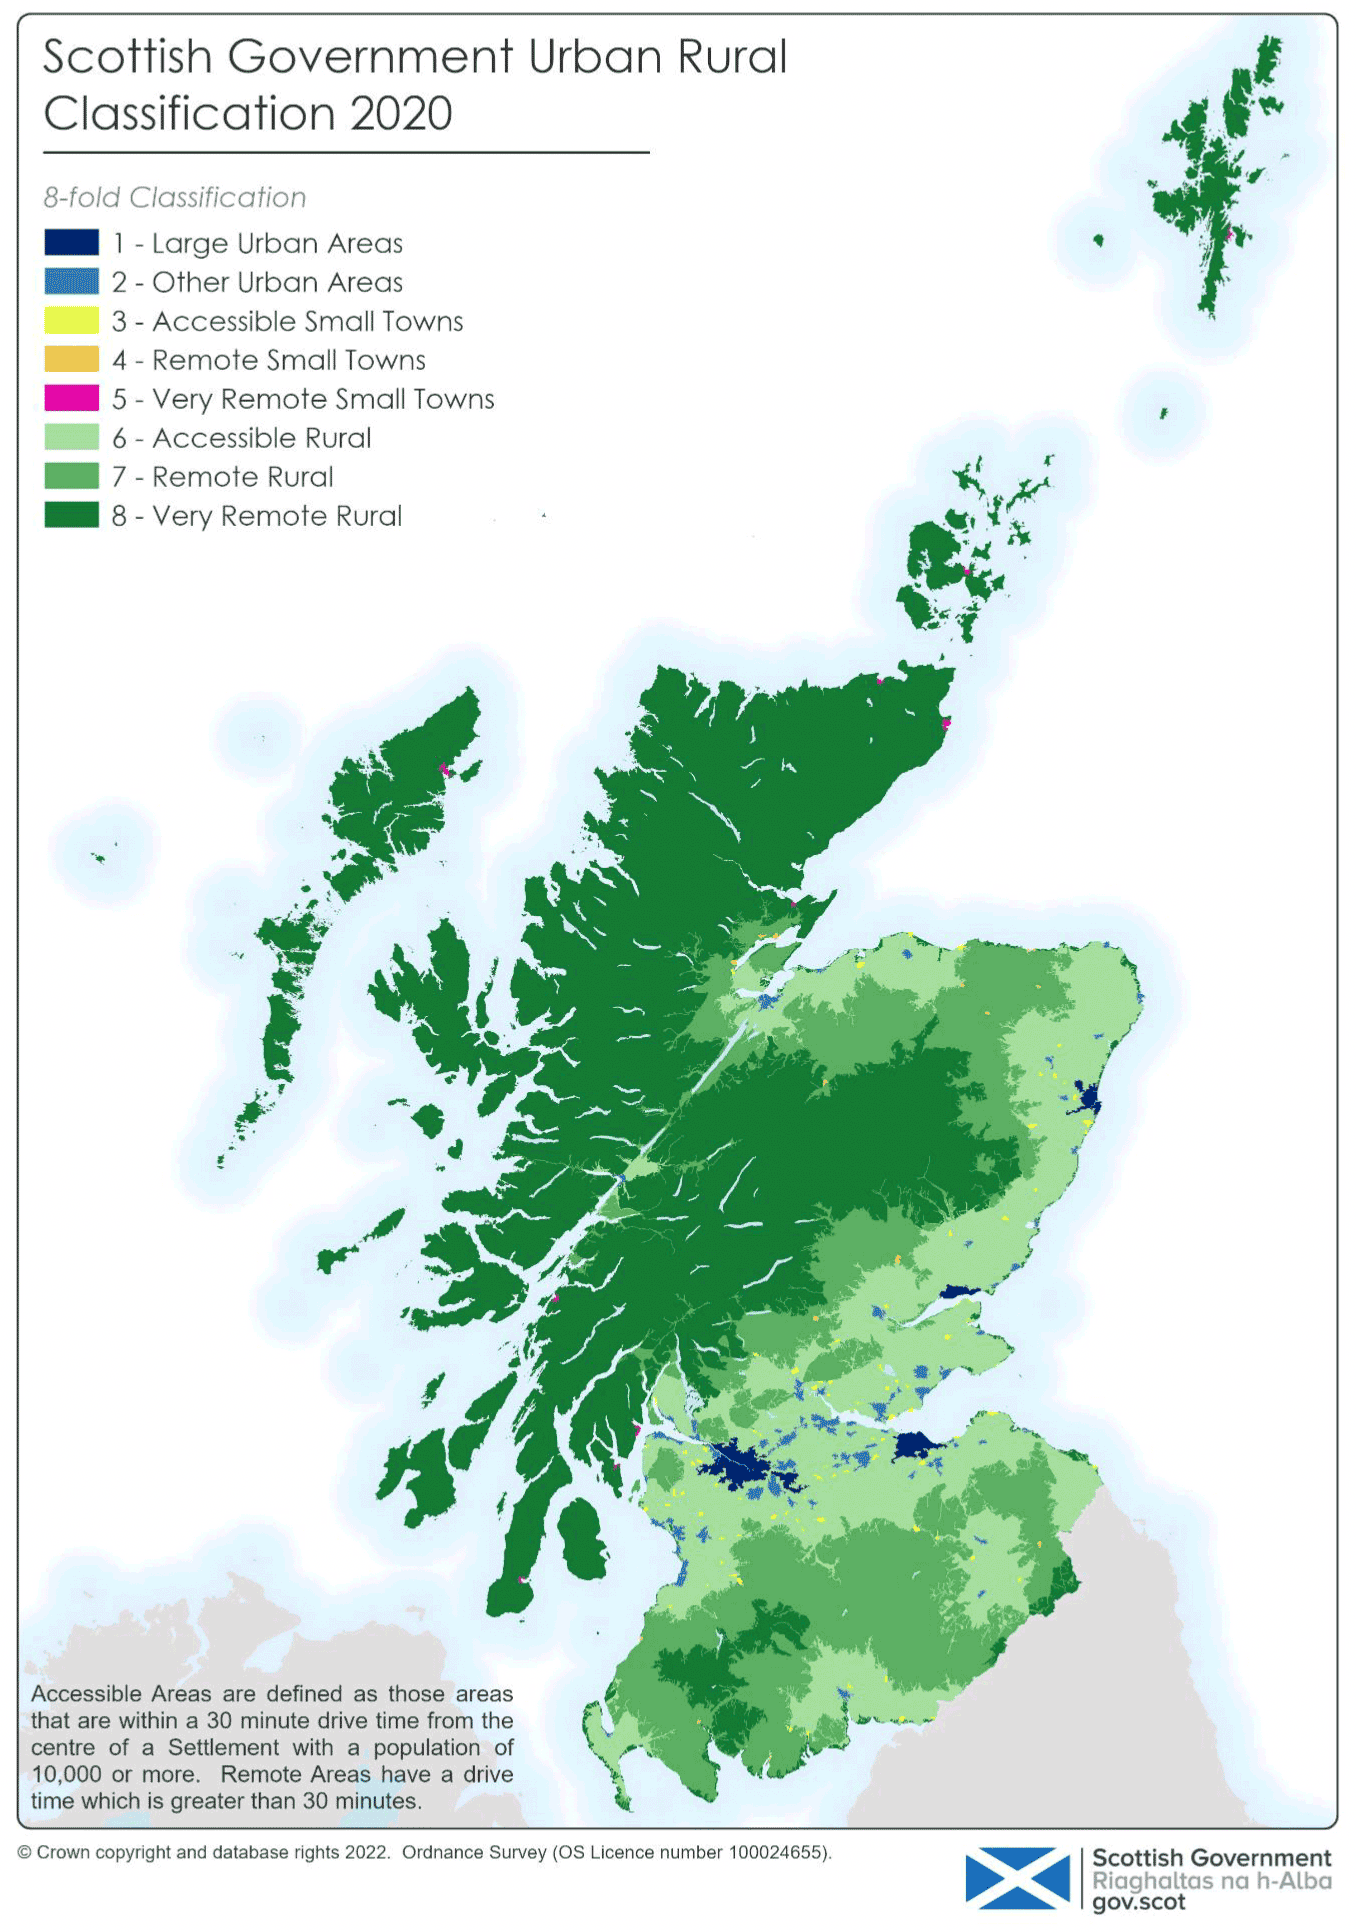 The map shows Scotland at national scale.  Scotland is classified according to an 8-fold classification represented by eight colours.  Large Urban Areas are navy blue, Other Urban Areas are royal blue, Accessible Small Towns are yellow, Remote Small Towns are orange, Very Remote Small Town are magenta, Accessible Rural is light green, Remote Rural is mid-green, and Very Remote Rural is dark green.  

In the 8-fold Urban Rural Classification, Large Urban Areas are defined as Settlements with a population greater than 125,000 people, e.g. Glasgow, Edinburgh, Dundee, Aberdeen, and Motherwell.  Other Urban Areas are defined as Settlements with a population of between 10,000 and 124,999 people, e.g. Inverness, Stirling, and Ayr.  Accessible Small Towns are defined as Settlements with a population of between 3000 and 9999 people that are also within a 30 minute drive of a Settlement with a population of over 10,000; e.g. Forres, Selkirk, and Castle Douglas.  Remote Small Towns have the same population band as Accessible Small Towns, but are defined as being more than 30 minute but less than 60 minute drive from a Settlement with a population of over 10,000; e.g. Aviemore, Dingwall, and Turriff.  Very Remote Rural Settlements also have the same population band, but are defined as being more than 60 minute drive from a Settlement with a population of over 10,000; e.g. Kirkwall, Lerwick, and Stornoway.  Accessible Rural areas are defined as Settlements with a population of less than 3000 people and all non-Settlement areas of Scotland within a 30 minute drive of a Settlement with a population of more than 10,000 people.  In SGUR 2020, Accessible Rural accounts for approximately 29% of Scotland’s total land area.  Remote Rural areas are defined as Settlements with less than 3000 people and all non-Settlement areas of Scotland within 30-60 minute drive of a Settlement with a population of more than 10,000 people.  In SGUR 2020, Remote Rural account for approximately 27% of Scotland’s total land area.  Very Remote Rural areas are defined as Settlements with less than 3000 people and all non-Settlement areas of Scotland which are more than 60 minute drive from a Settlement with a population of more than 10,000 people.  In SGUR 2020, Very Remote Rural accounts for approximately 41% of Scotland’s total land area.
